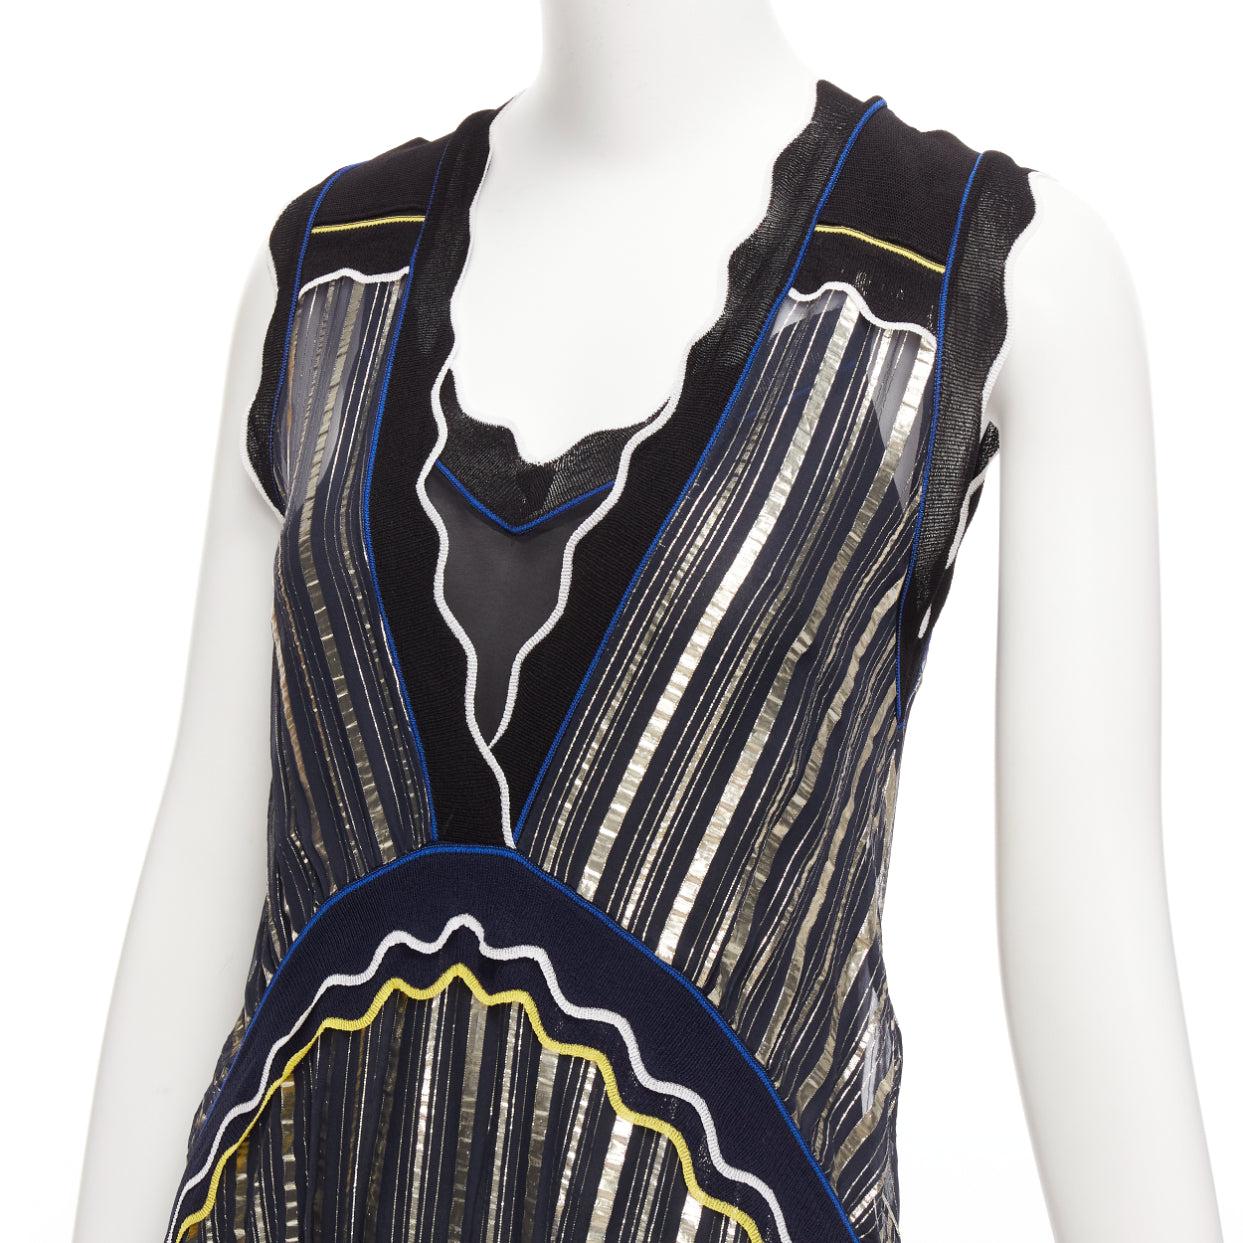 PETER PILOTTO gold metallic blue yellow trim pleated V-neck knee dress XS
Reference: NKLL/A00189
Brand: Peter Pilotto
Material: Viscose, Blend
Color: Gold, Blue
Pattern: Striped
Closure: Slip On
Lining: Black Fabric
Extra Details: Lining can be worn